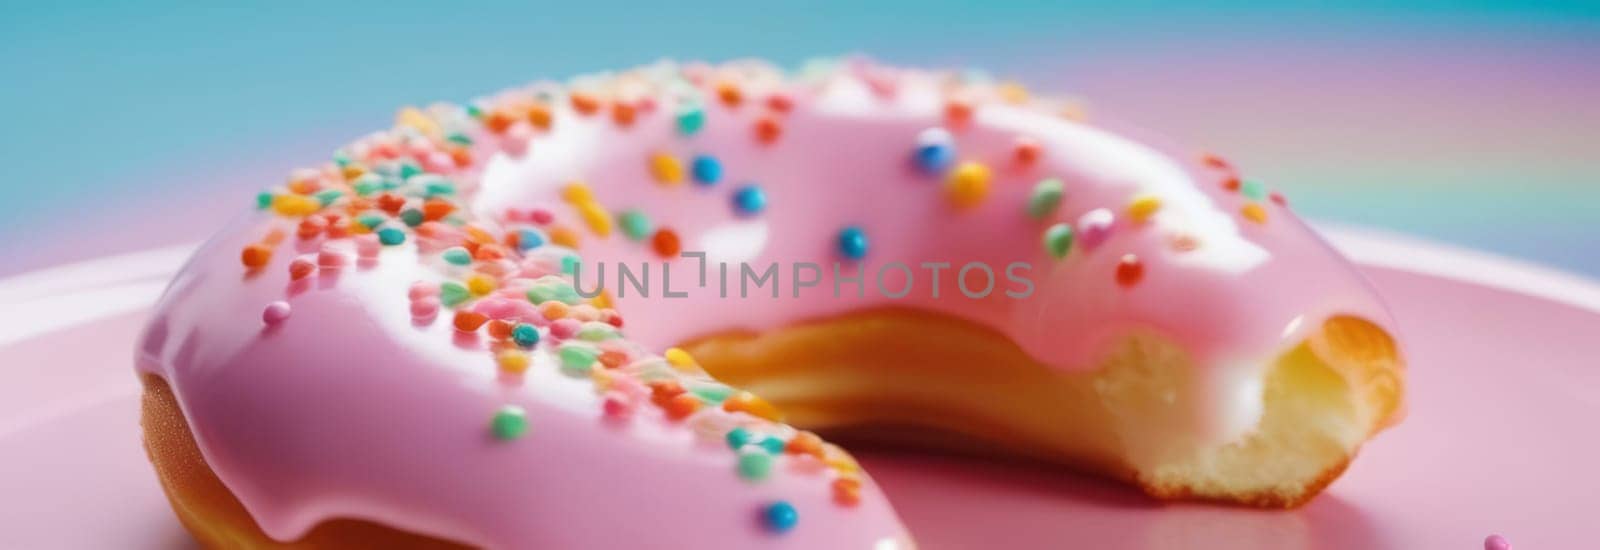 Freshly baked donut topped with generous amount of rainbow-colored sprinkles drizzled with rich sweet icing on colorful background. For culinary book, magazine, food blog, social media platforms